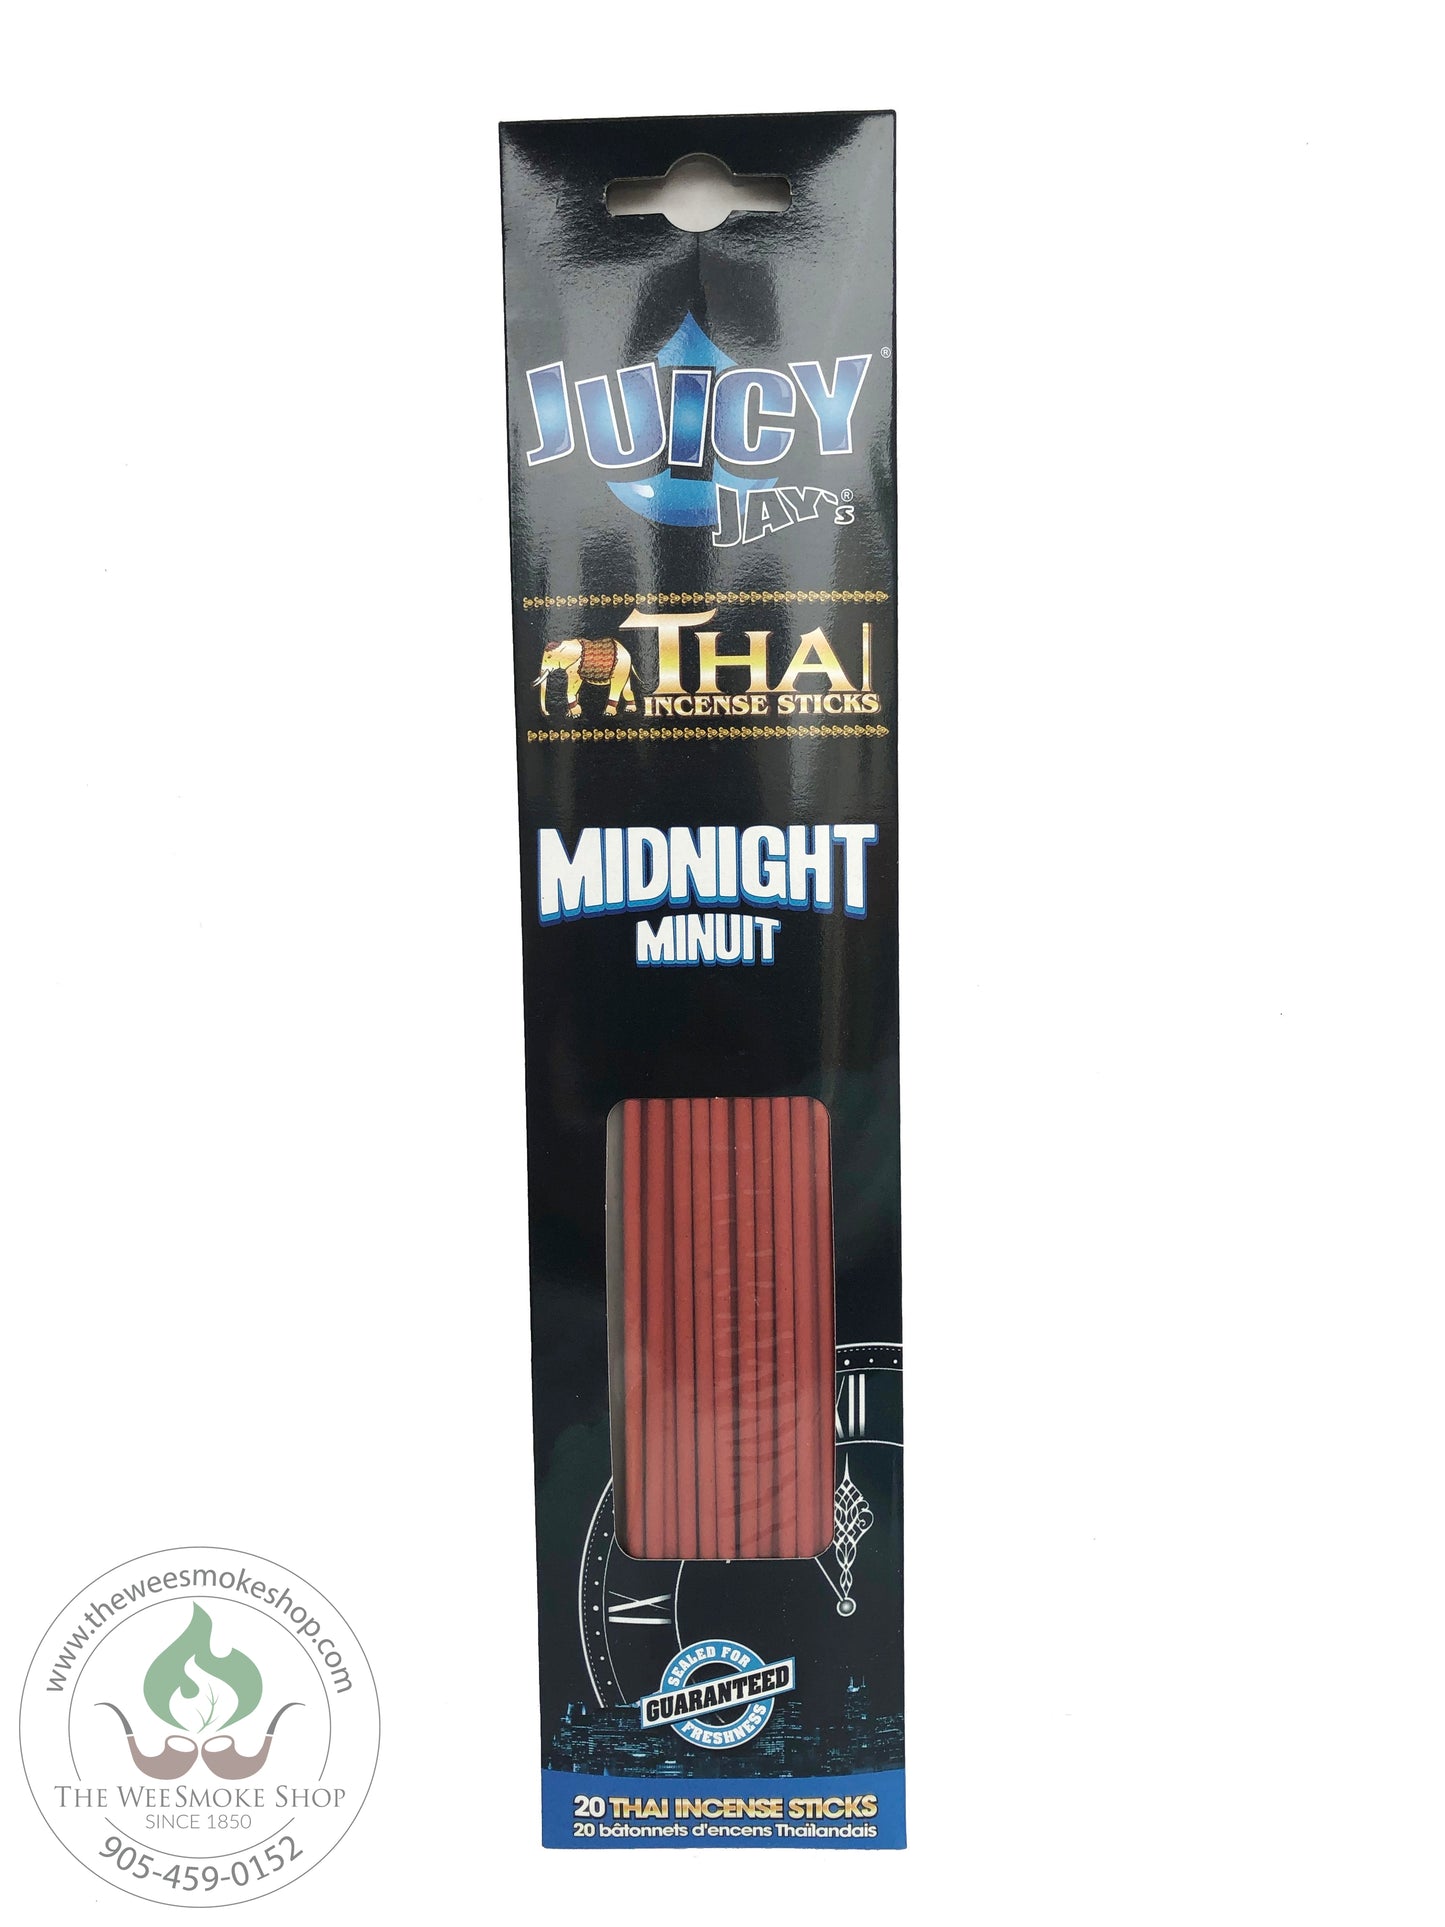 Midnight-Juicy Jay Incense-The Wee Smoke Shop